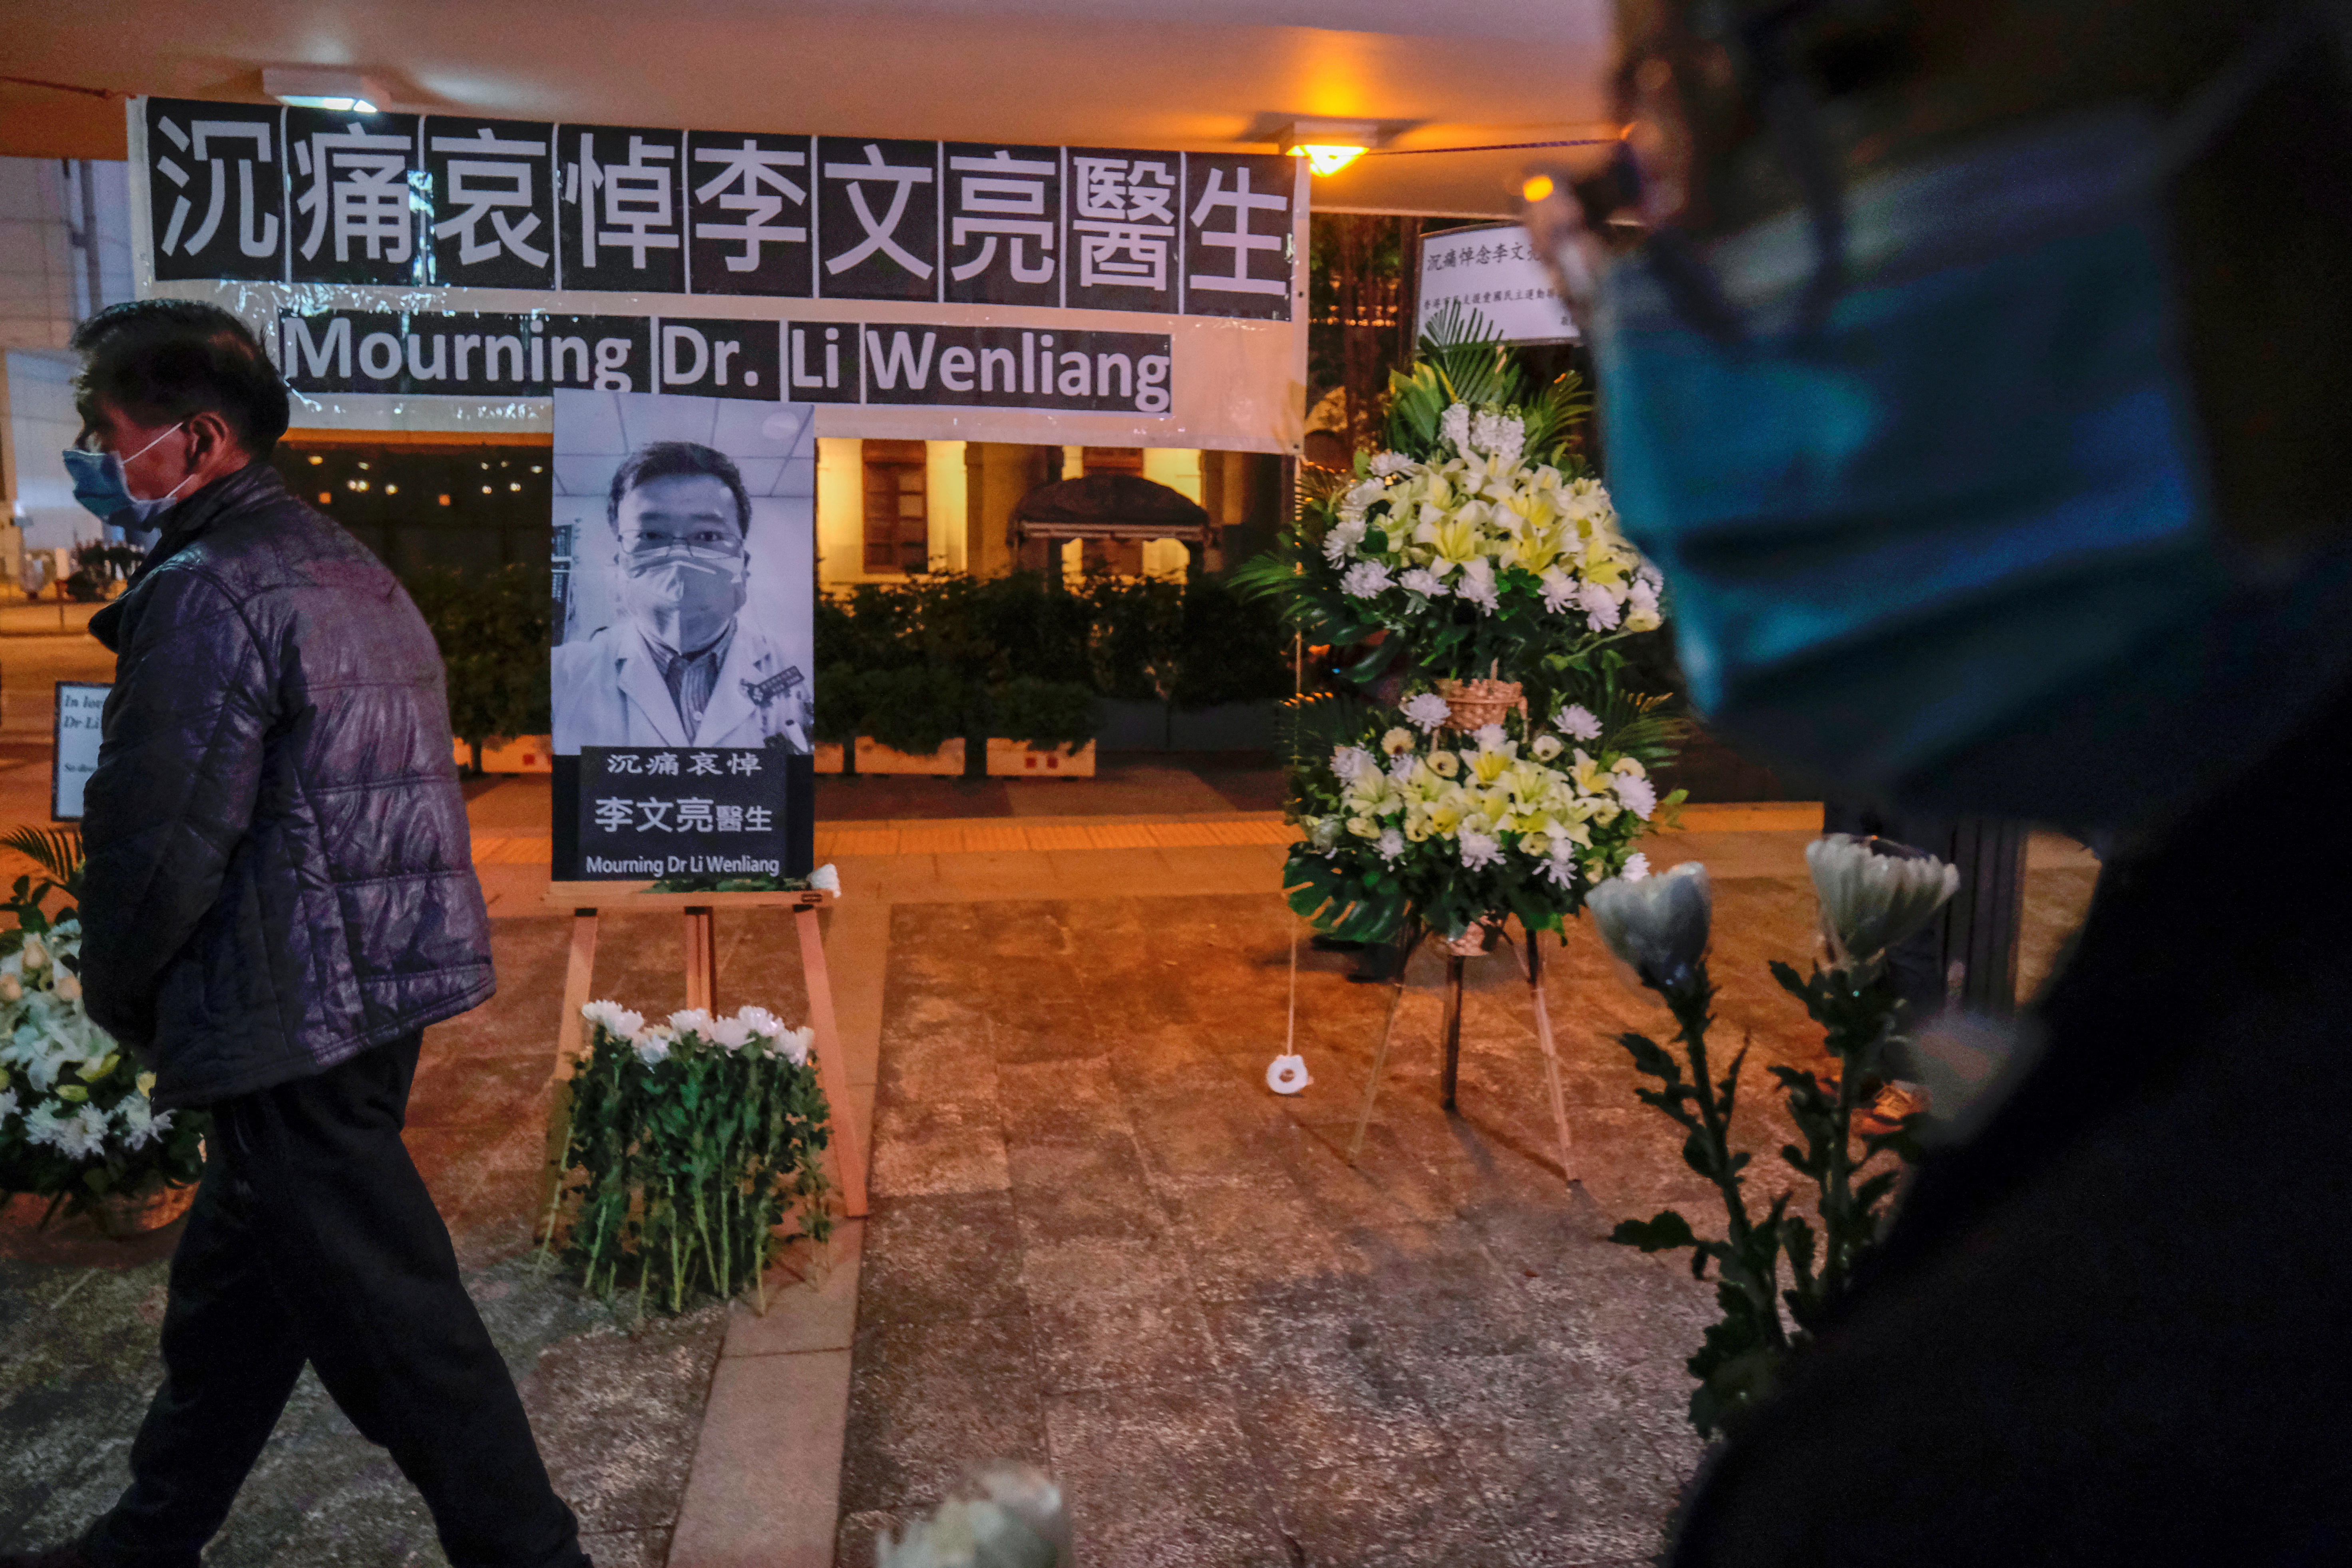 People wearing masks attend a vigil for late Li Wenliang, an ophthalmologist who died of coronavirus at a hospital in Wuhan, in Hong Kong